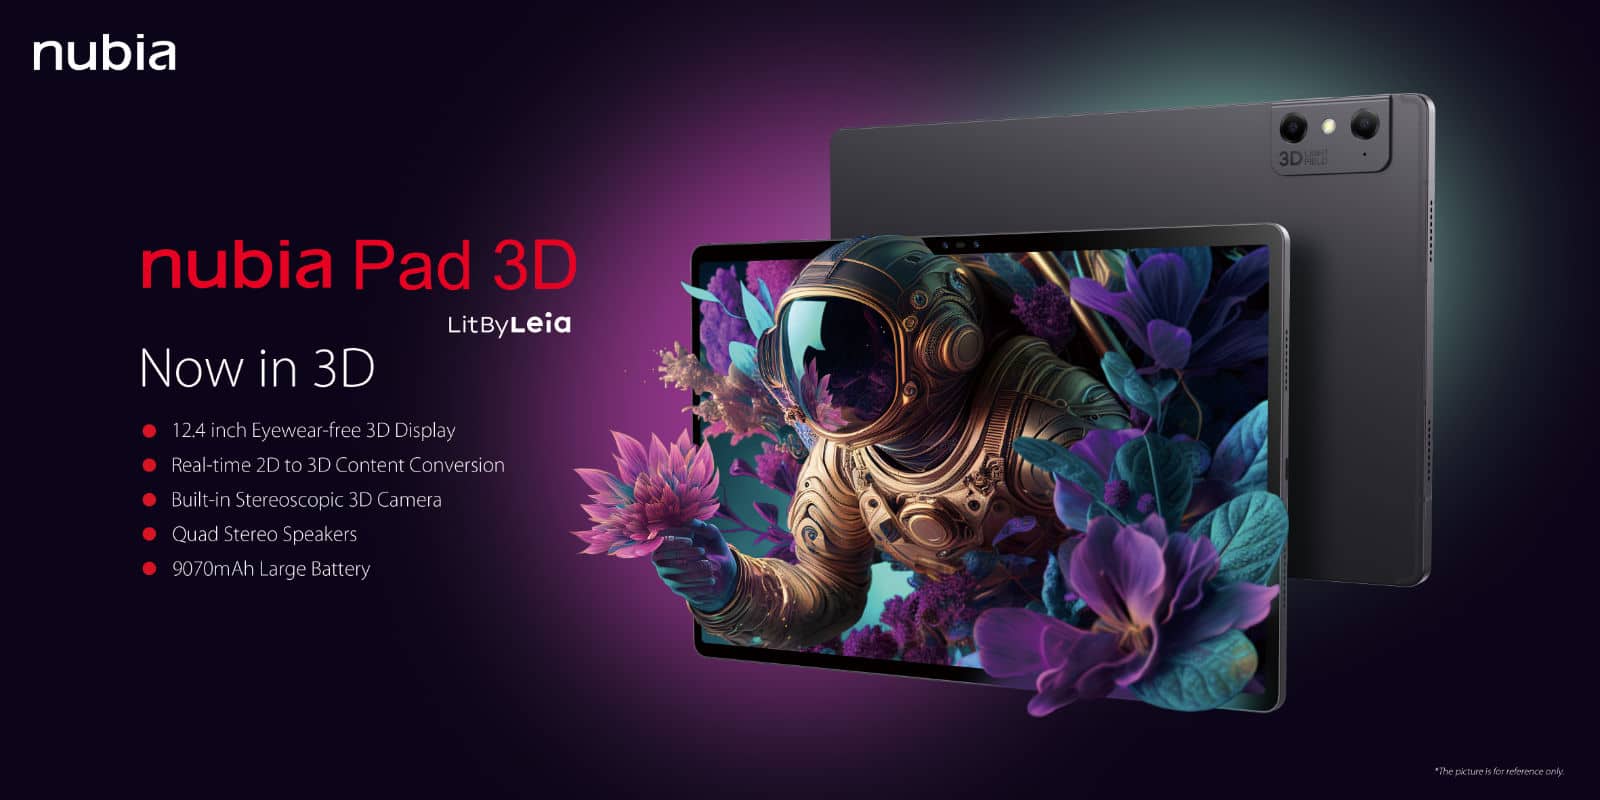 The nubia Pad 3D is now available for pre-order for $1,199